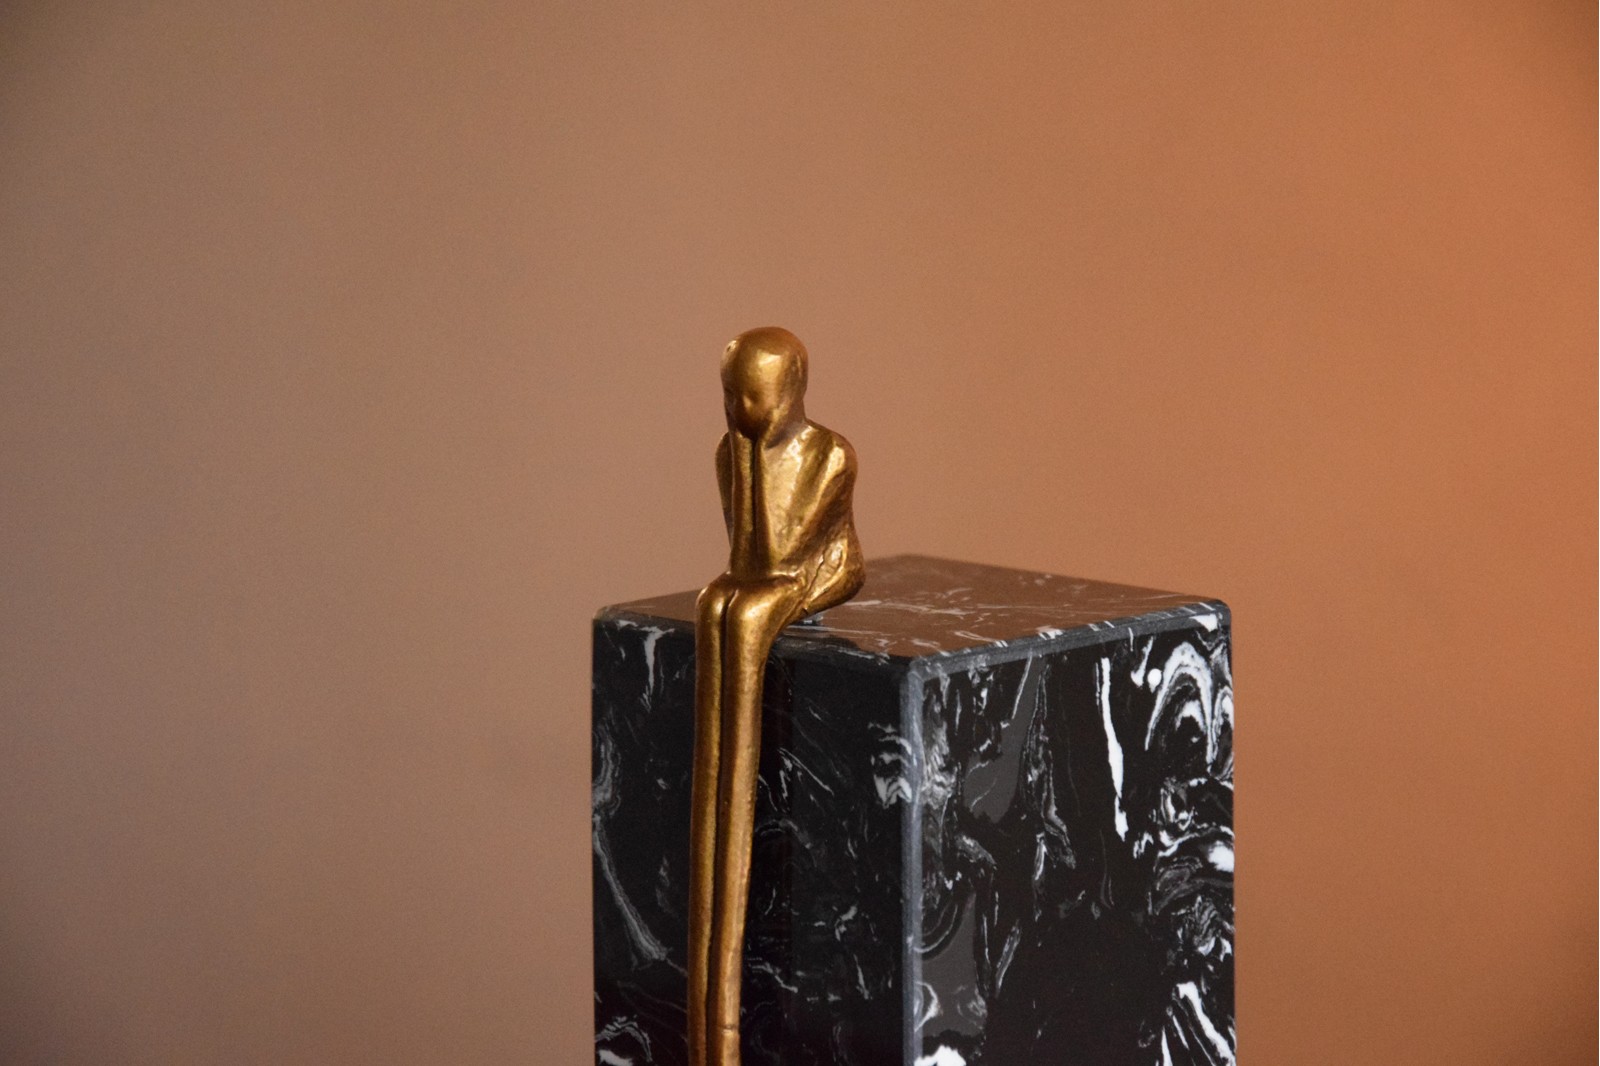 WAITING COLLECTION. MARBLE AND METAL SCULPTURE